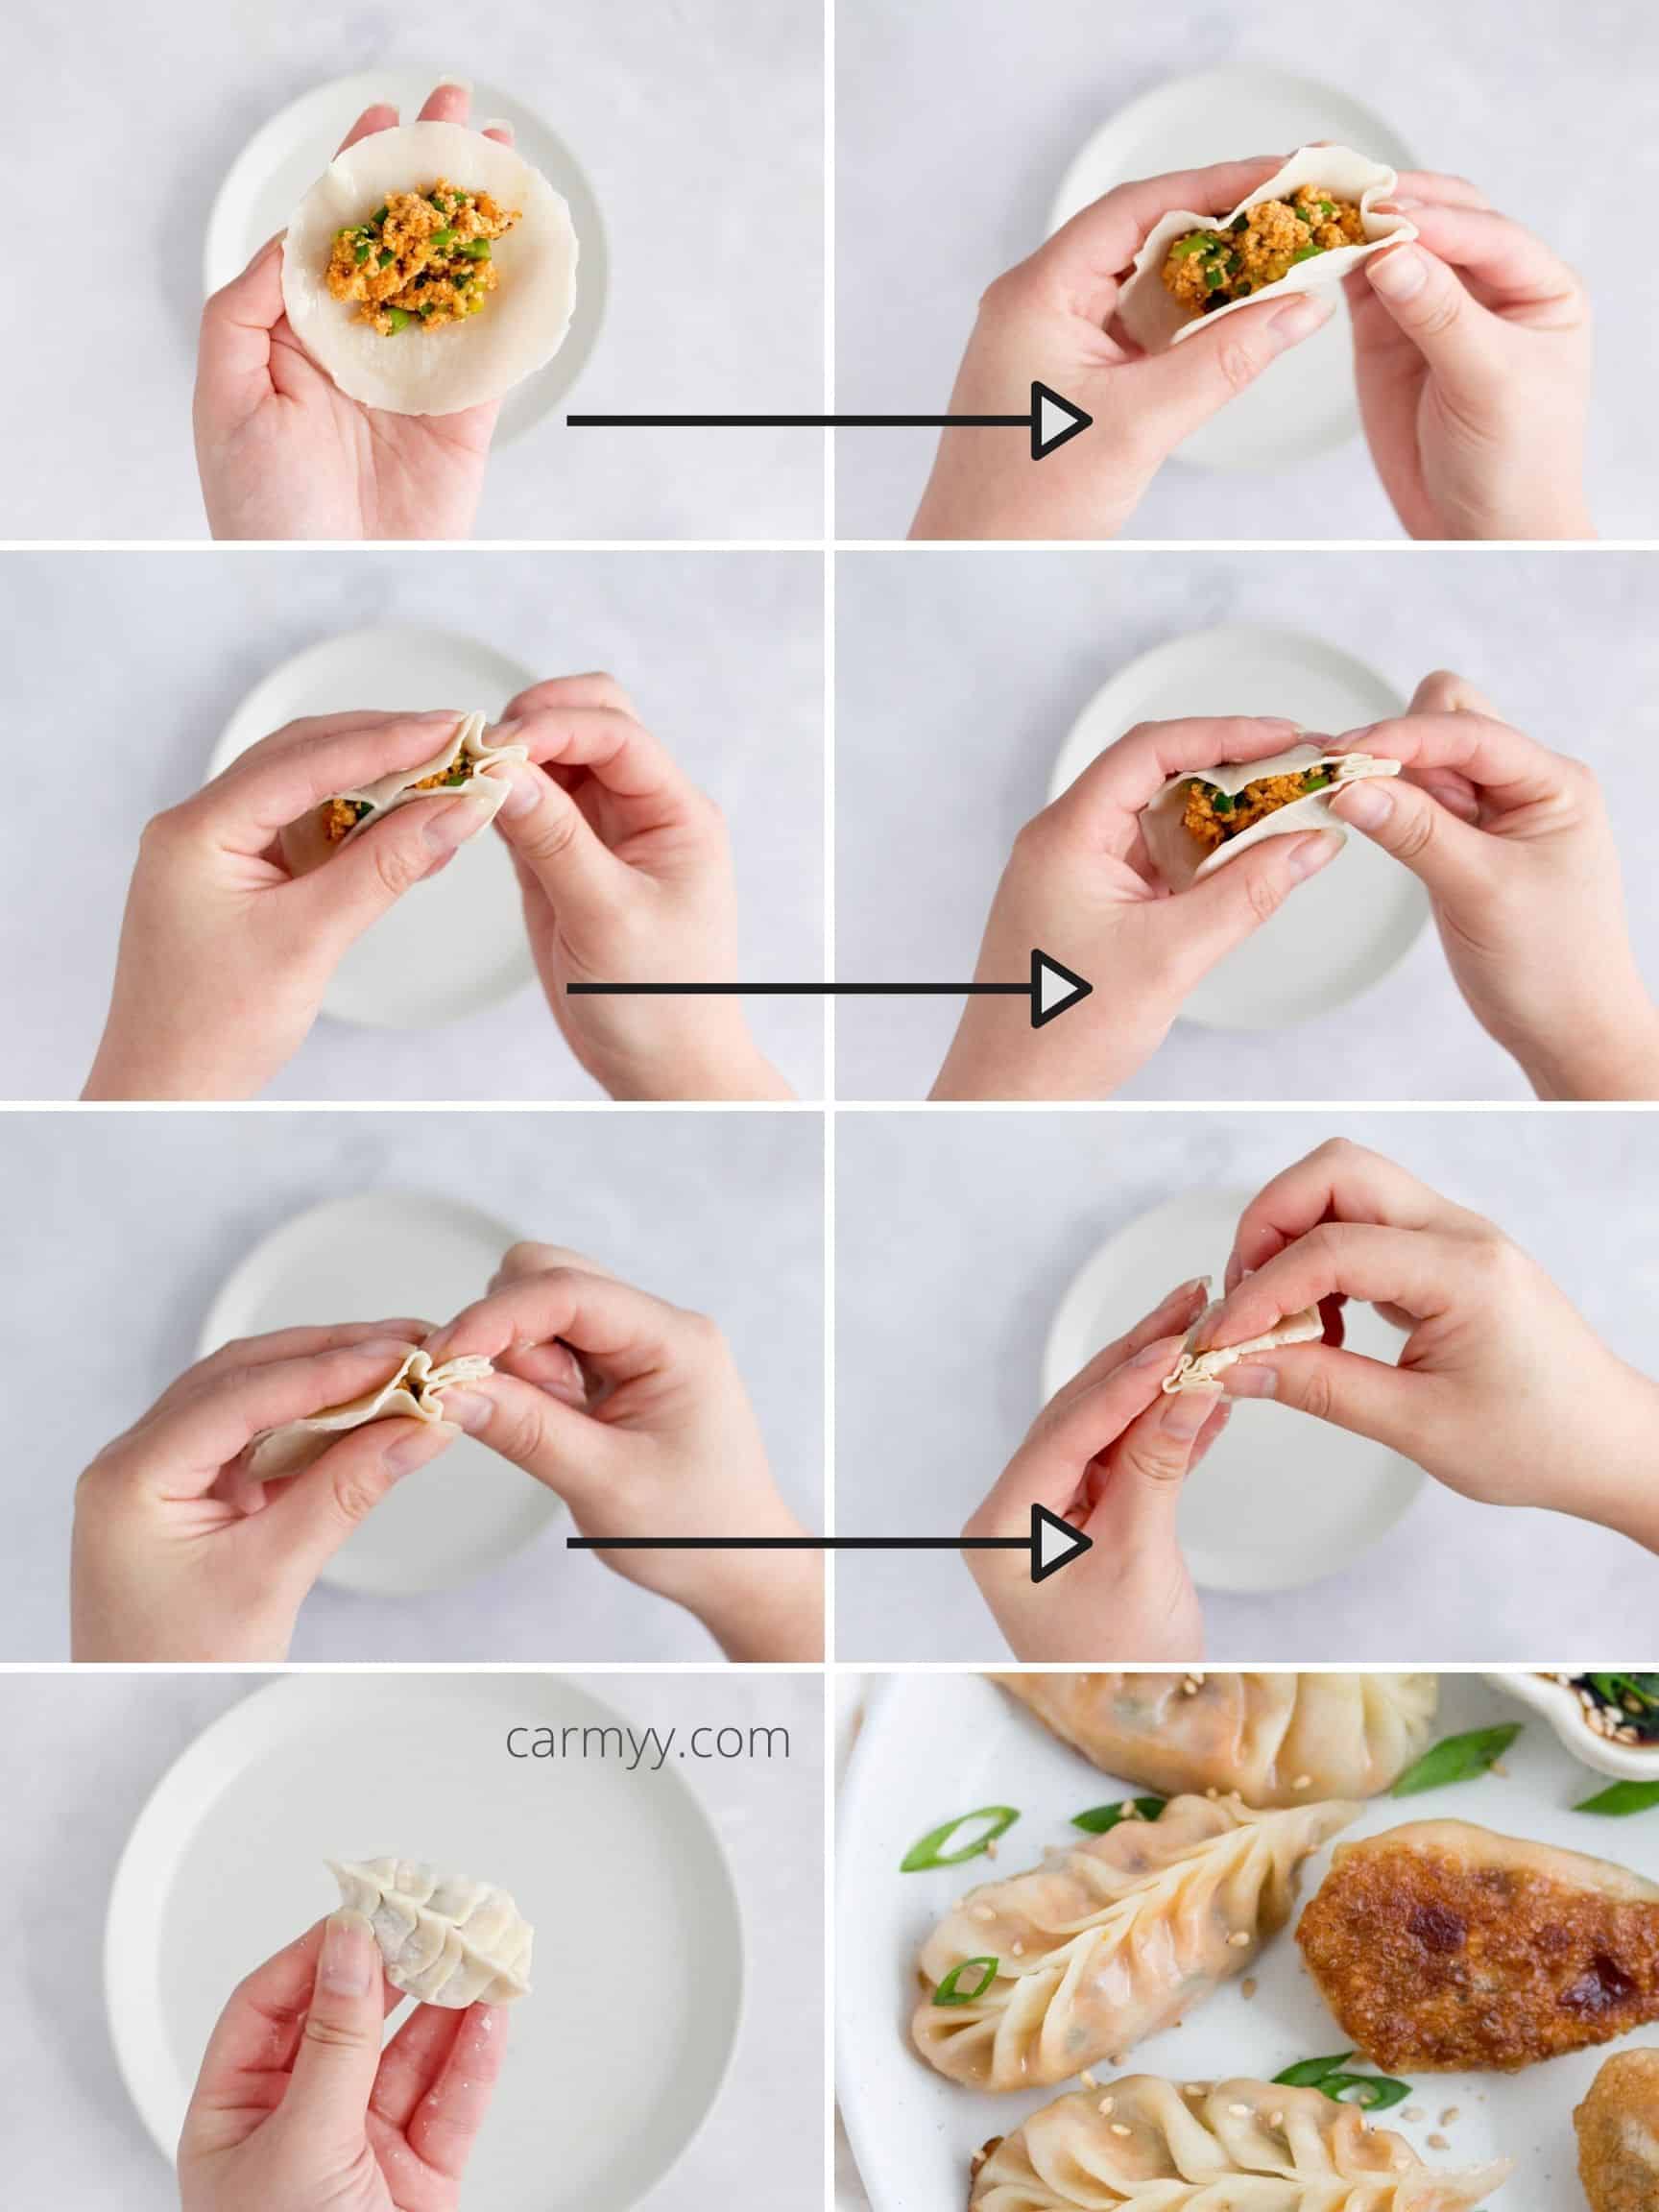 Step by step photos showing how to fold the dumplings.